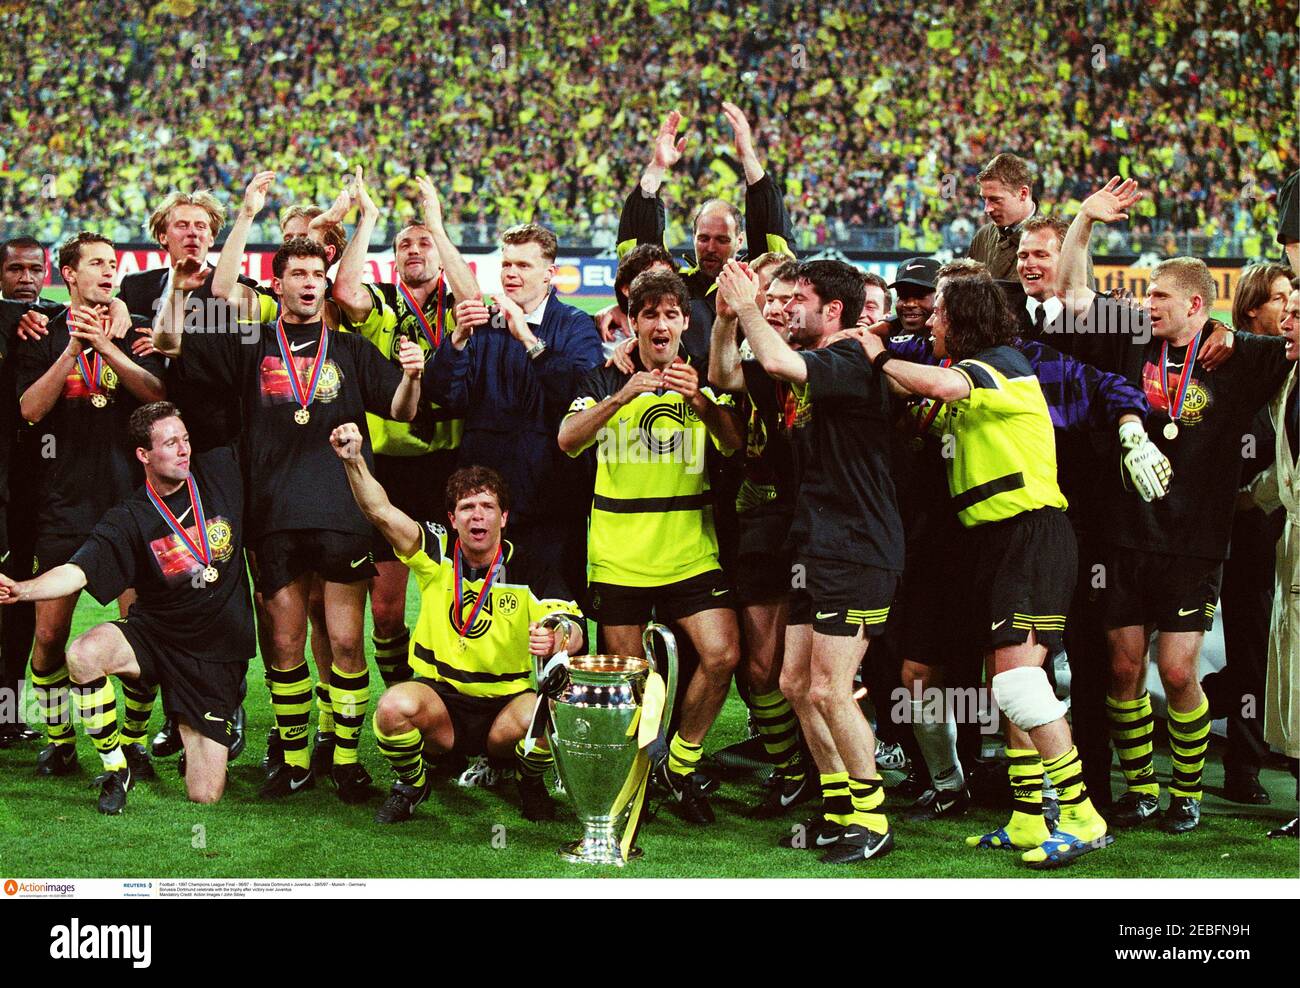 Football - 1997 Champions League Final - 96/97 - Borussia Dortmund v  Juventus - 28/5/97 - Munich - Germany Borussia Dortmund celebrate with the  trophy after victory over Juventus Mandatory Credit: Action Images / John  Sibley Stock Photo - Alamy